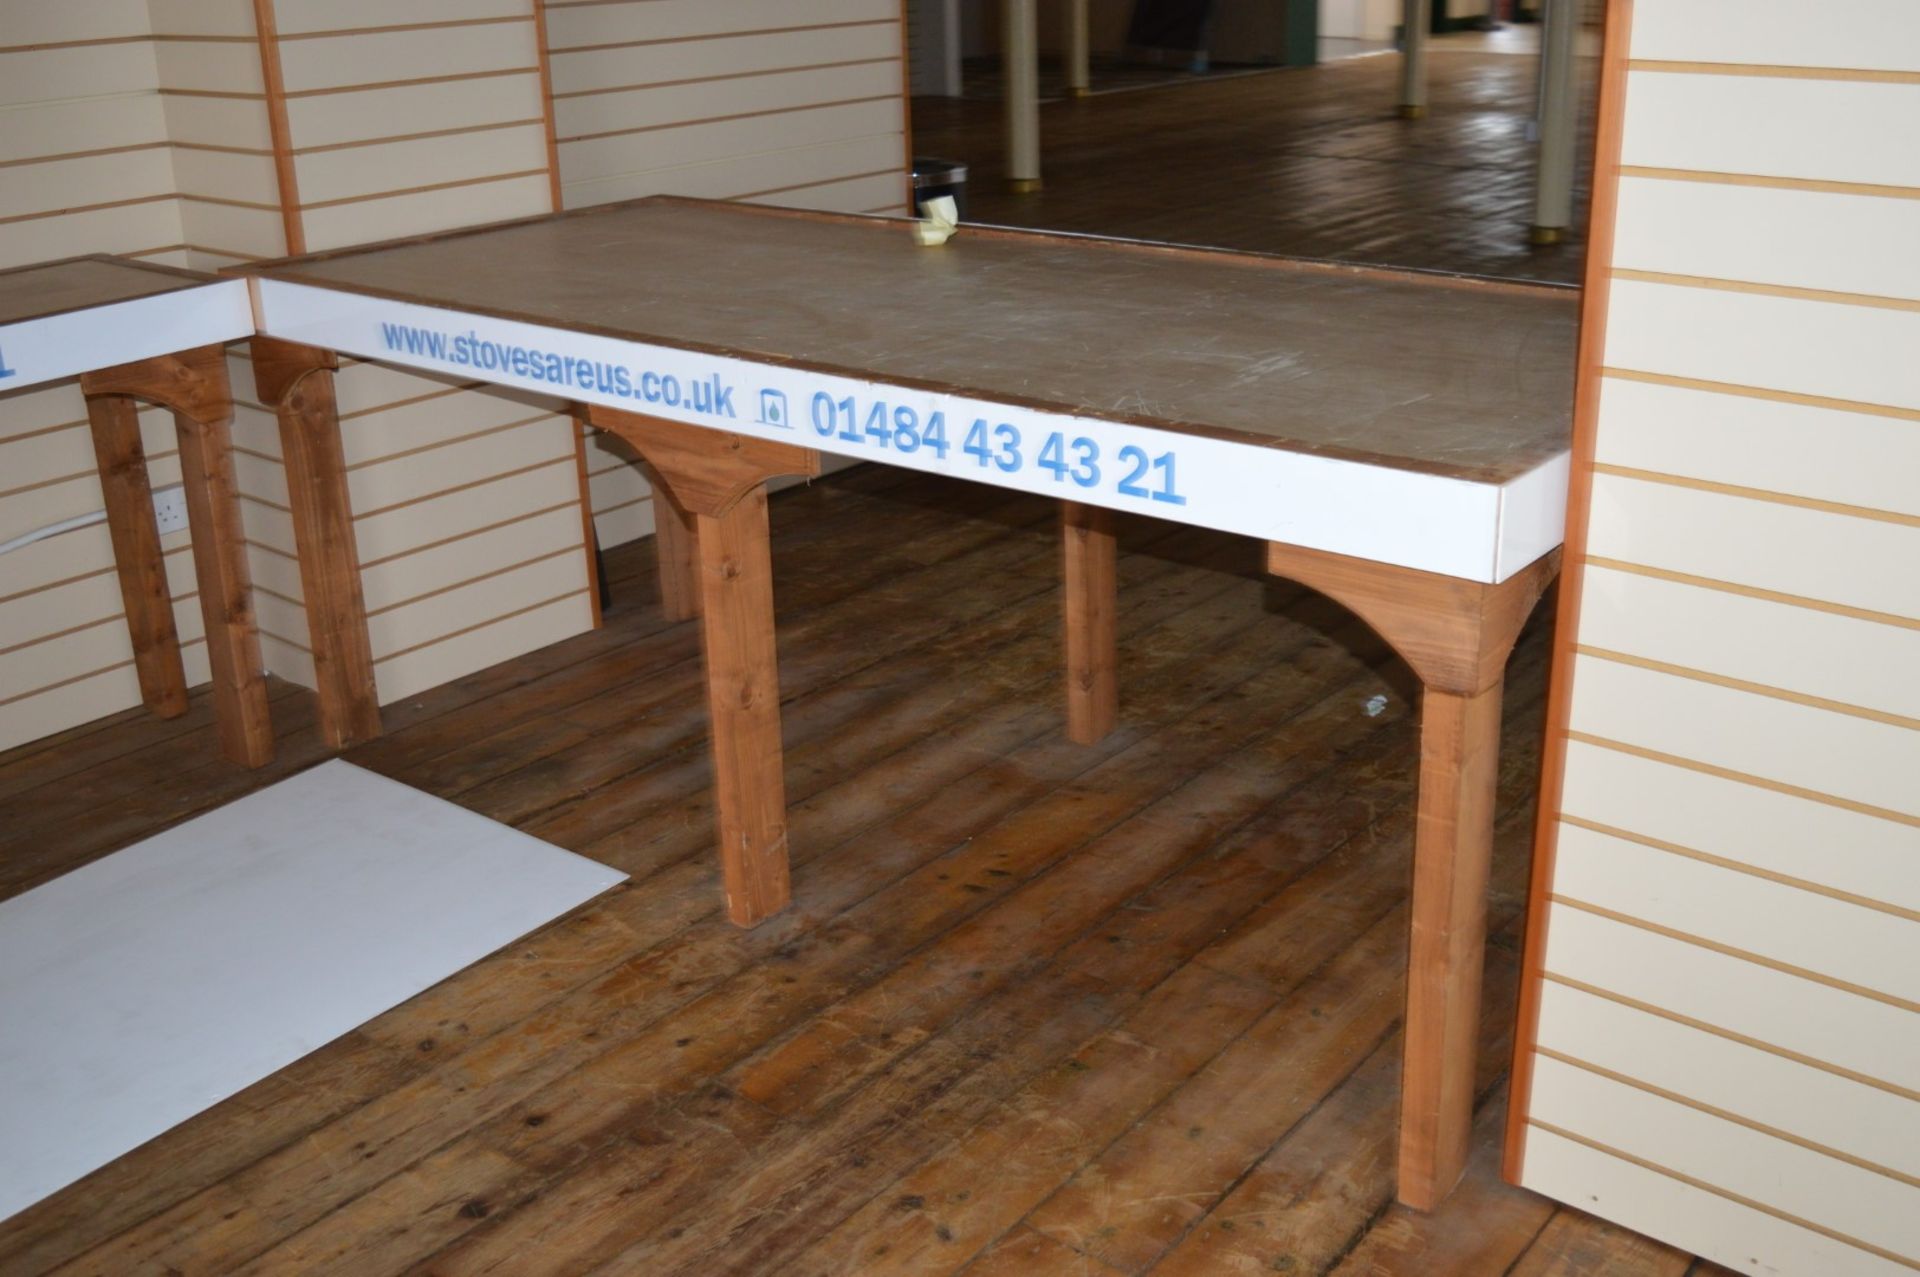 8 x Large Tables - Ideal For Exhibitions or Indoor Jumble Sales etc - Ref BB1700 - CL351 - Location: